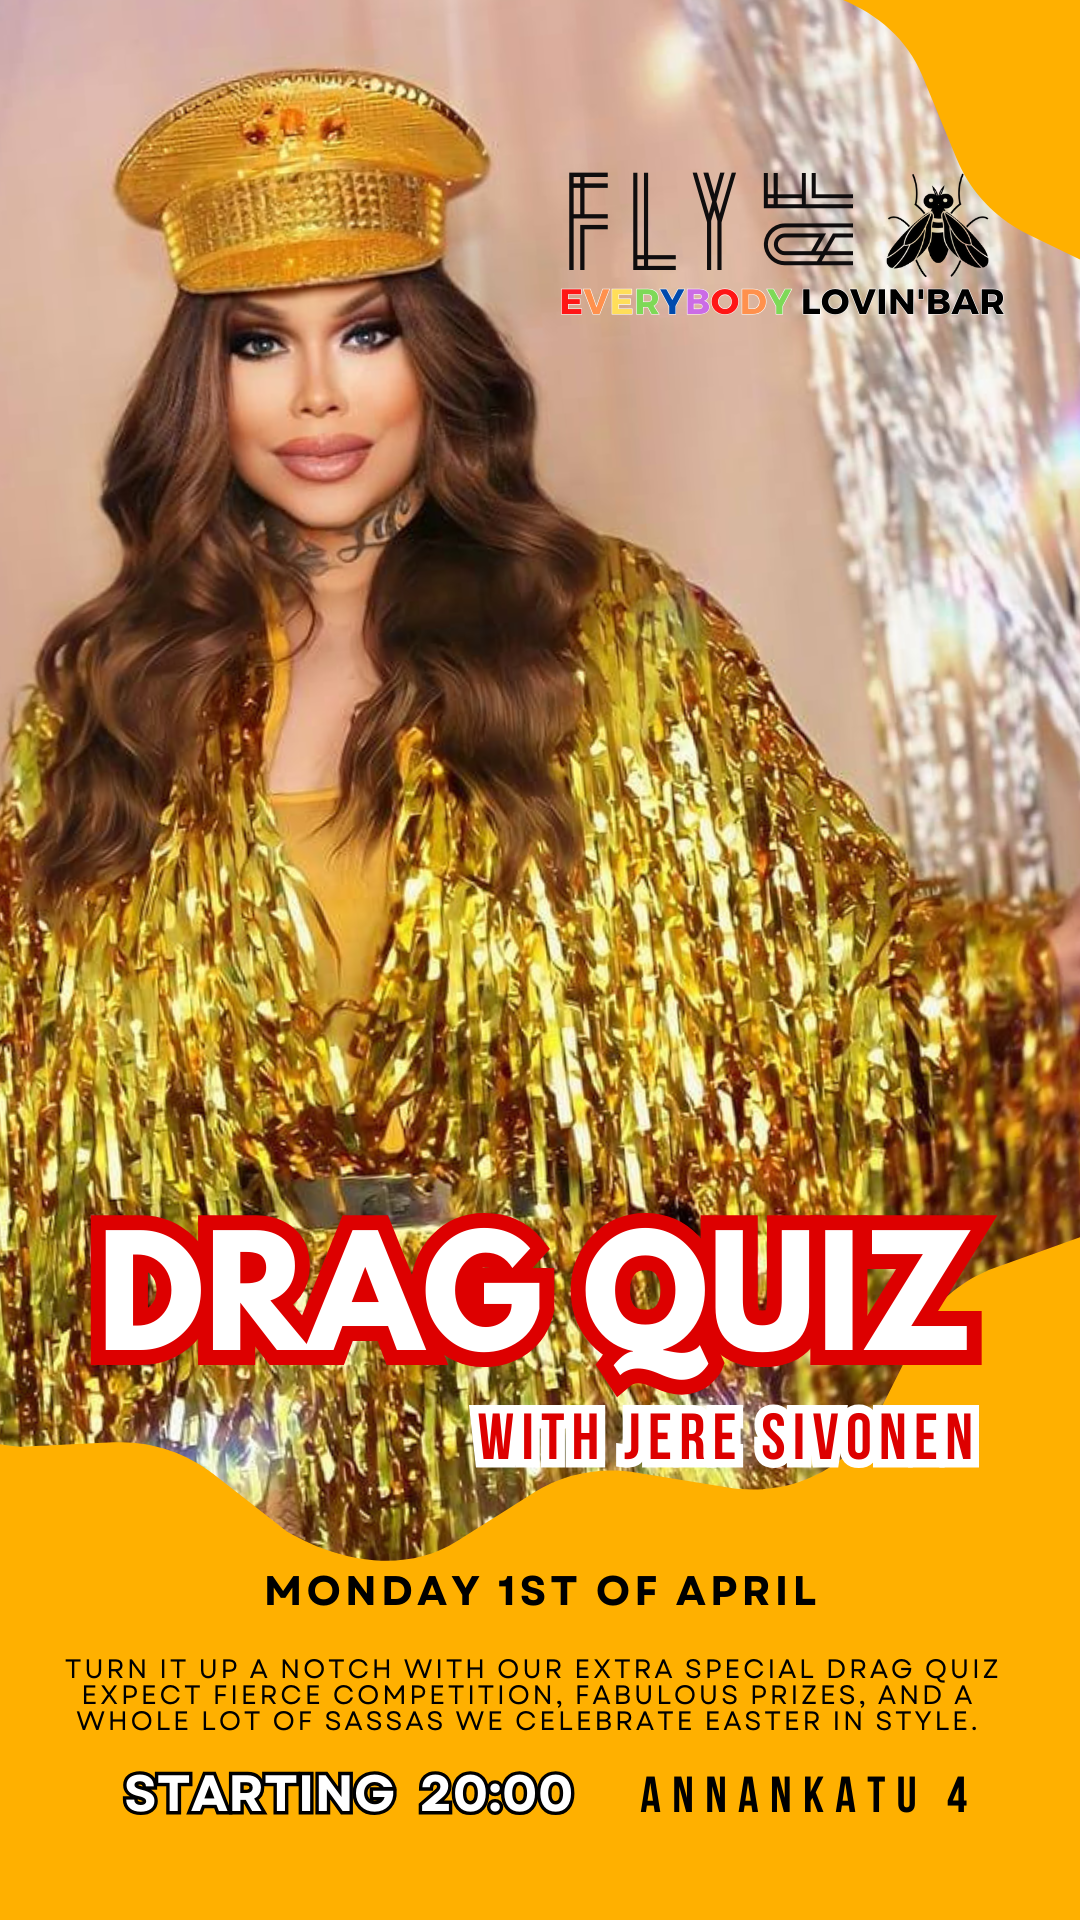 And just when you thought the party was winding down, we're turning it up a notch with our Extra Special Drag Quiz hosted by the one and only Jere Sivonen! Expect fierce competition, fabulous prizes, and a whole lot of sass as we celebrate Easter in style. It's going to be legendary!